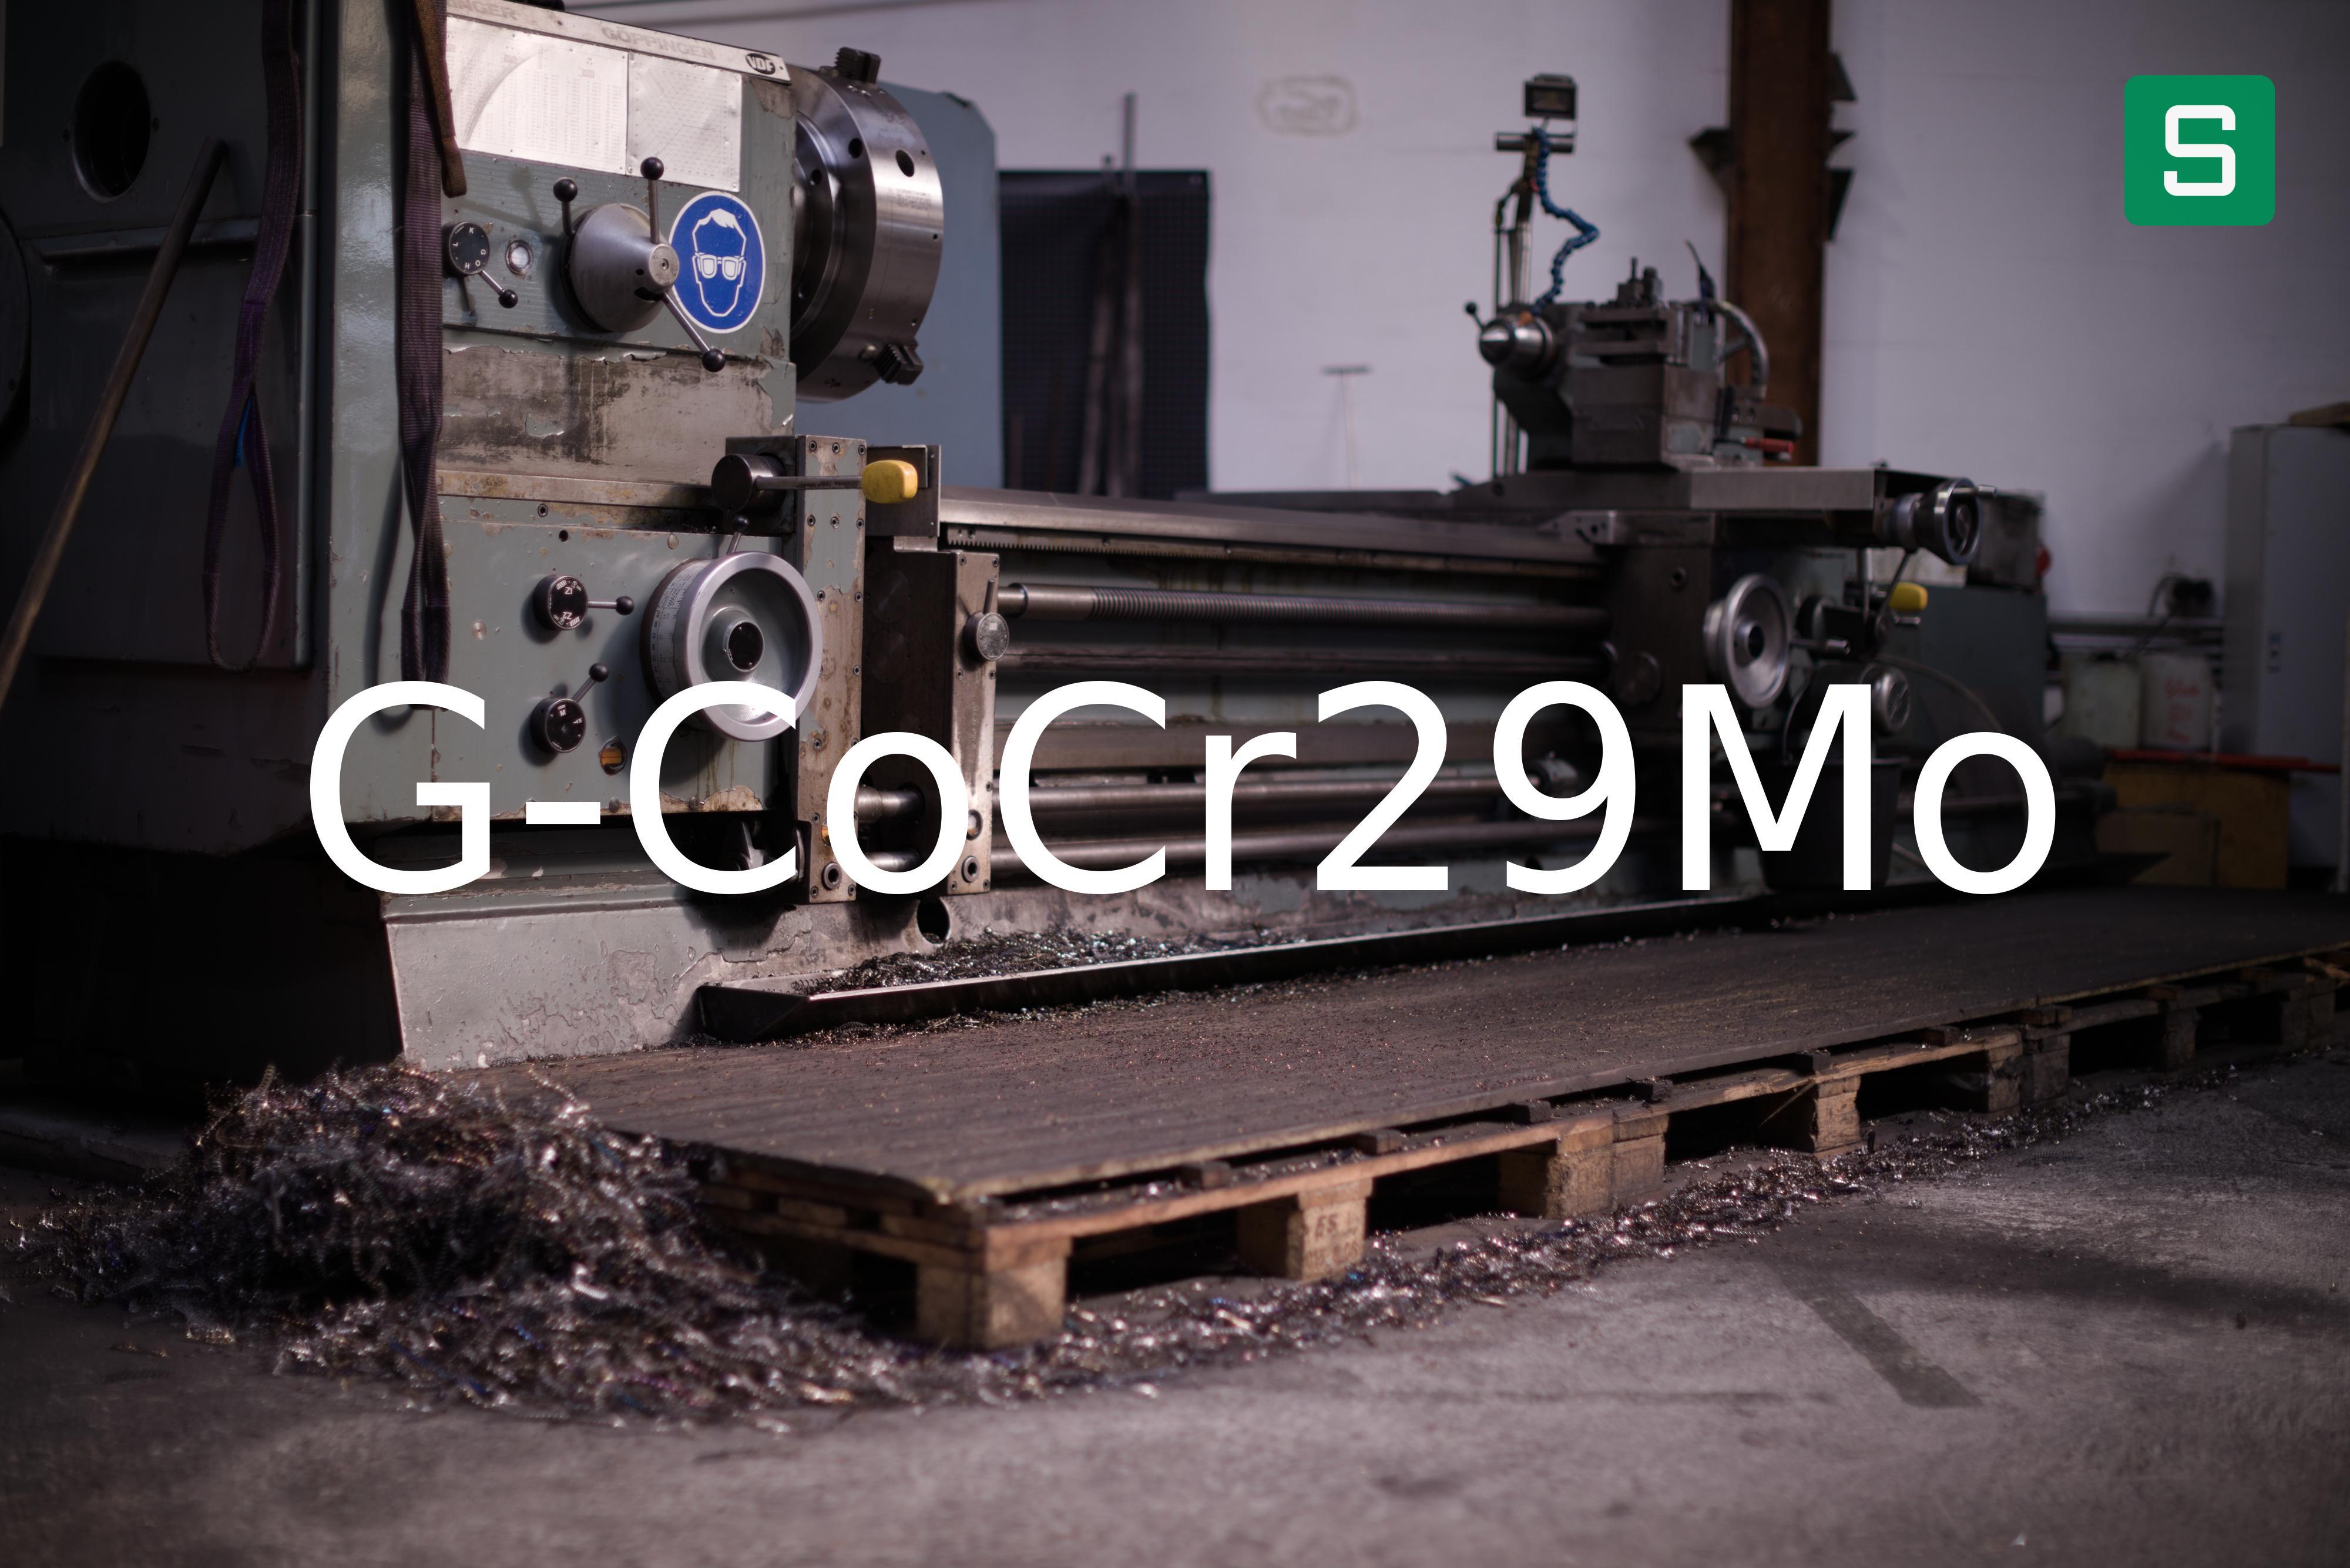 Steel Material: G-CoCr29Mo